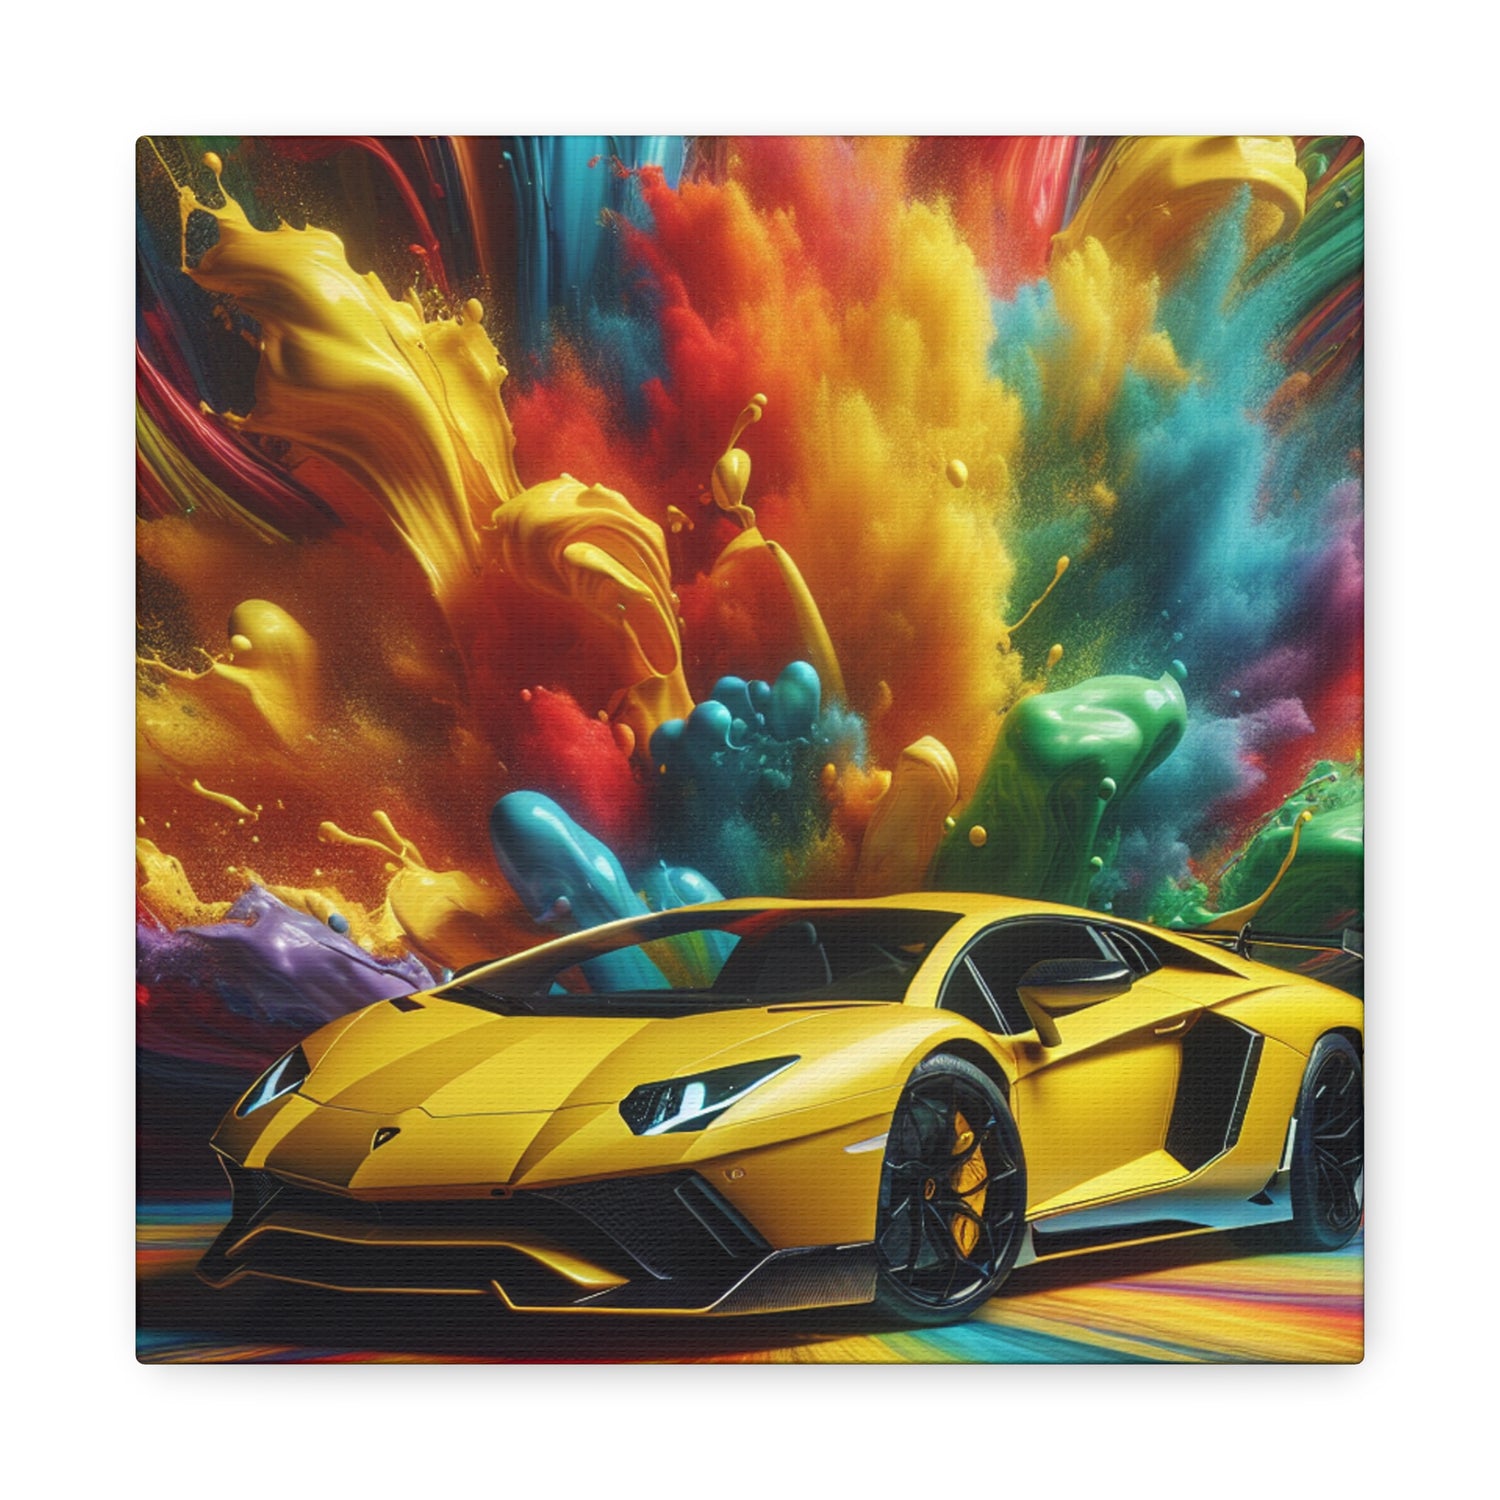 Lamborghini Aventador Canva Wall Art, Luxurious Car Painting, Home Decor, Office Decor, Unique Gift for Car Enthusiasts and Collectors